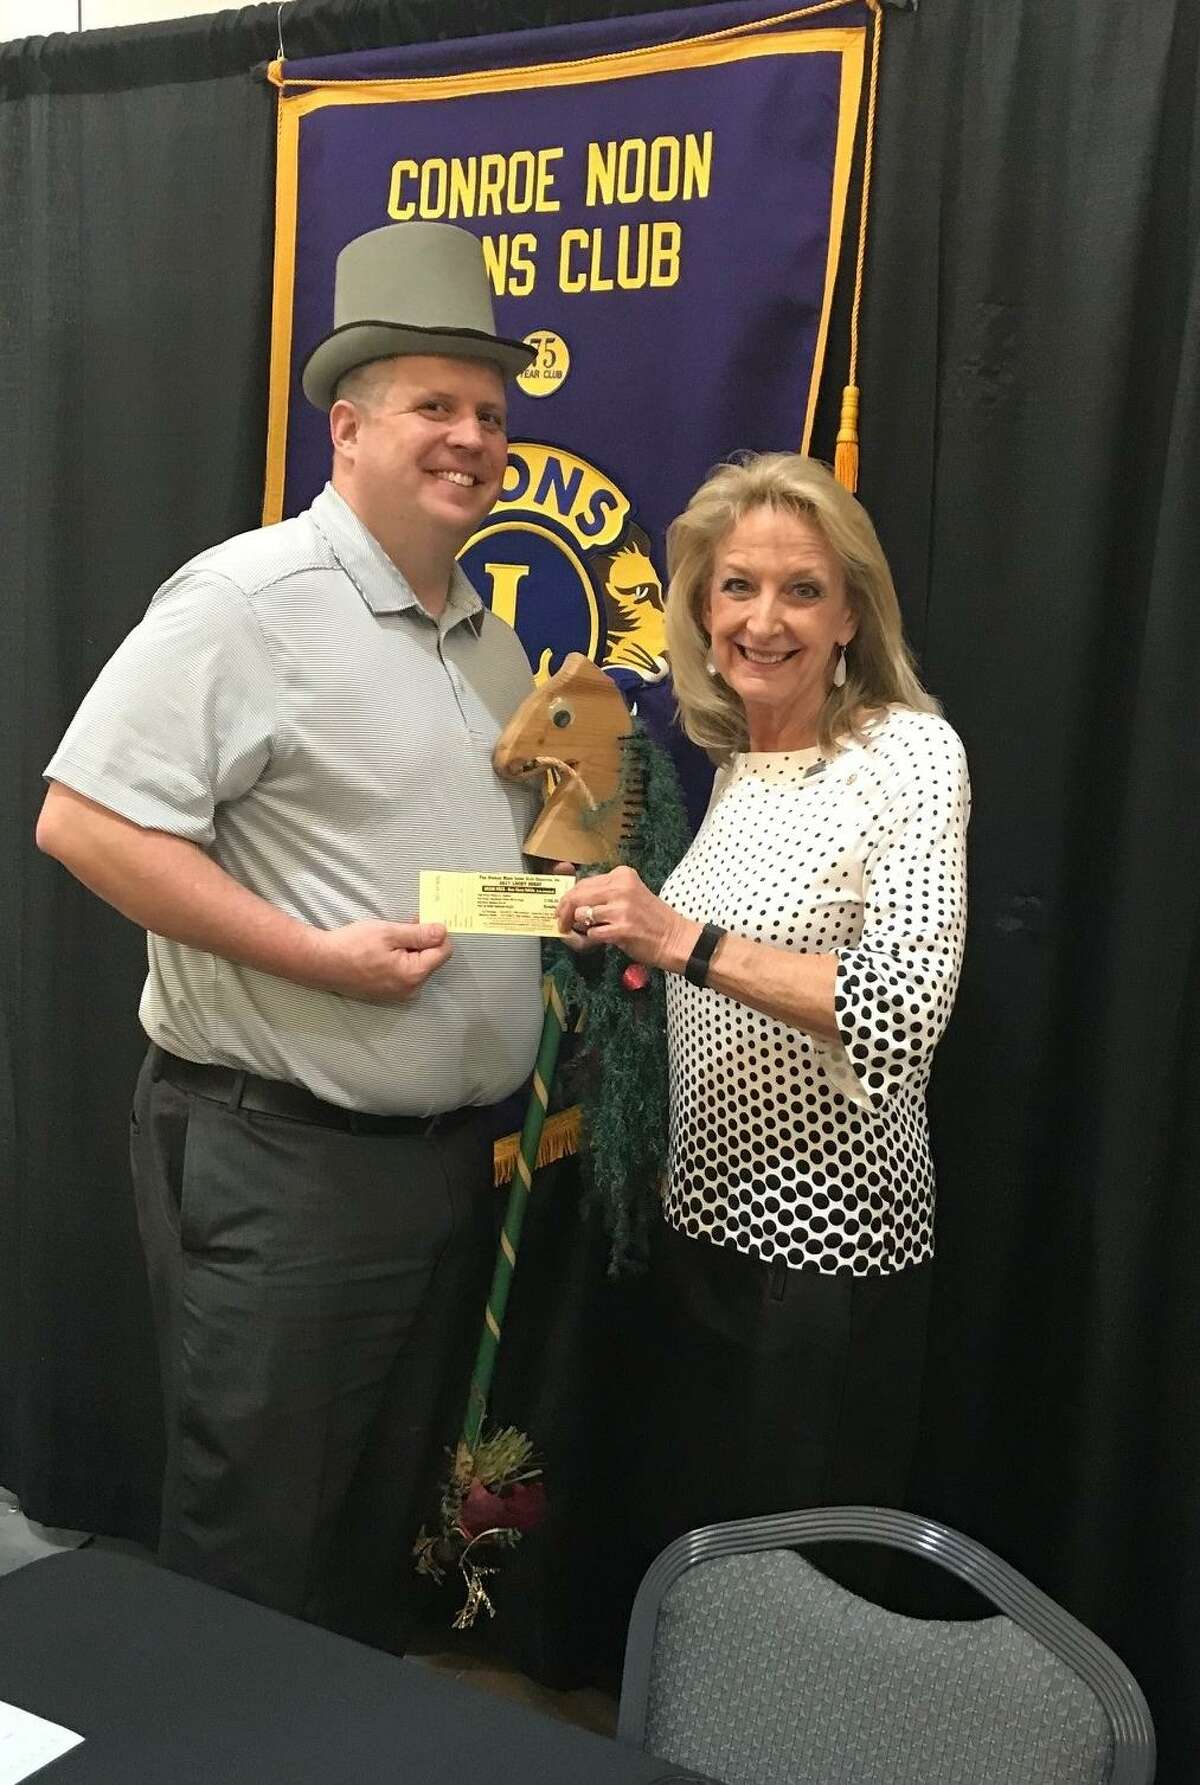 Lion Warner Phelps was selected to lead the Conroe Noon Lions Club in the club year 2022-23.